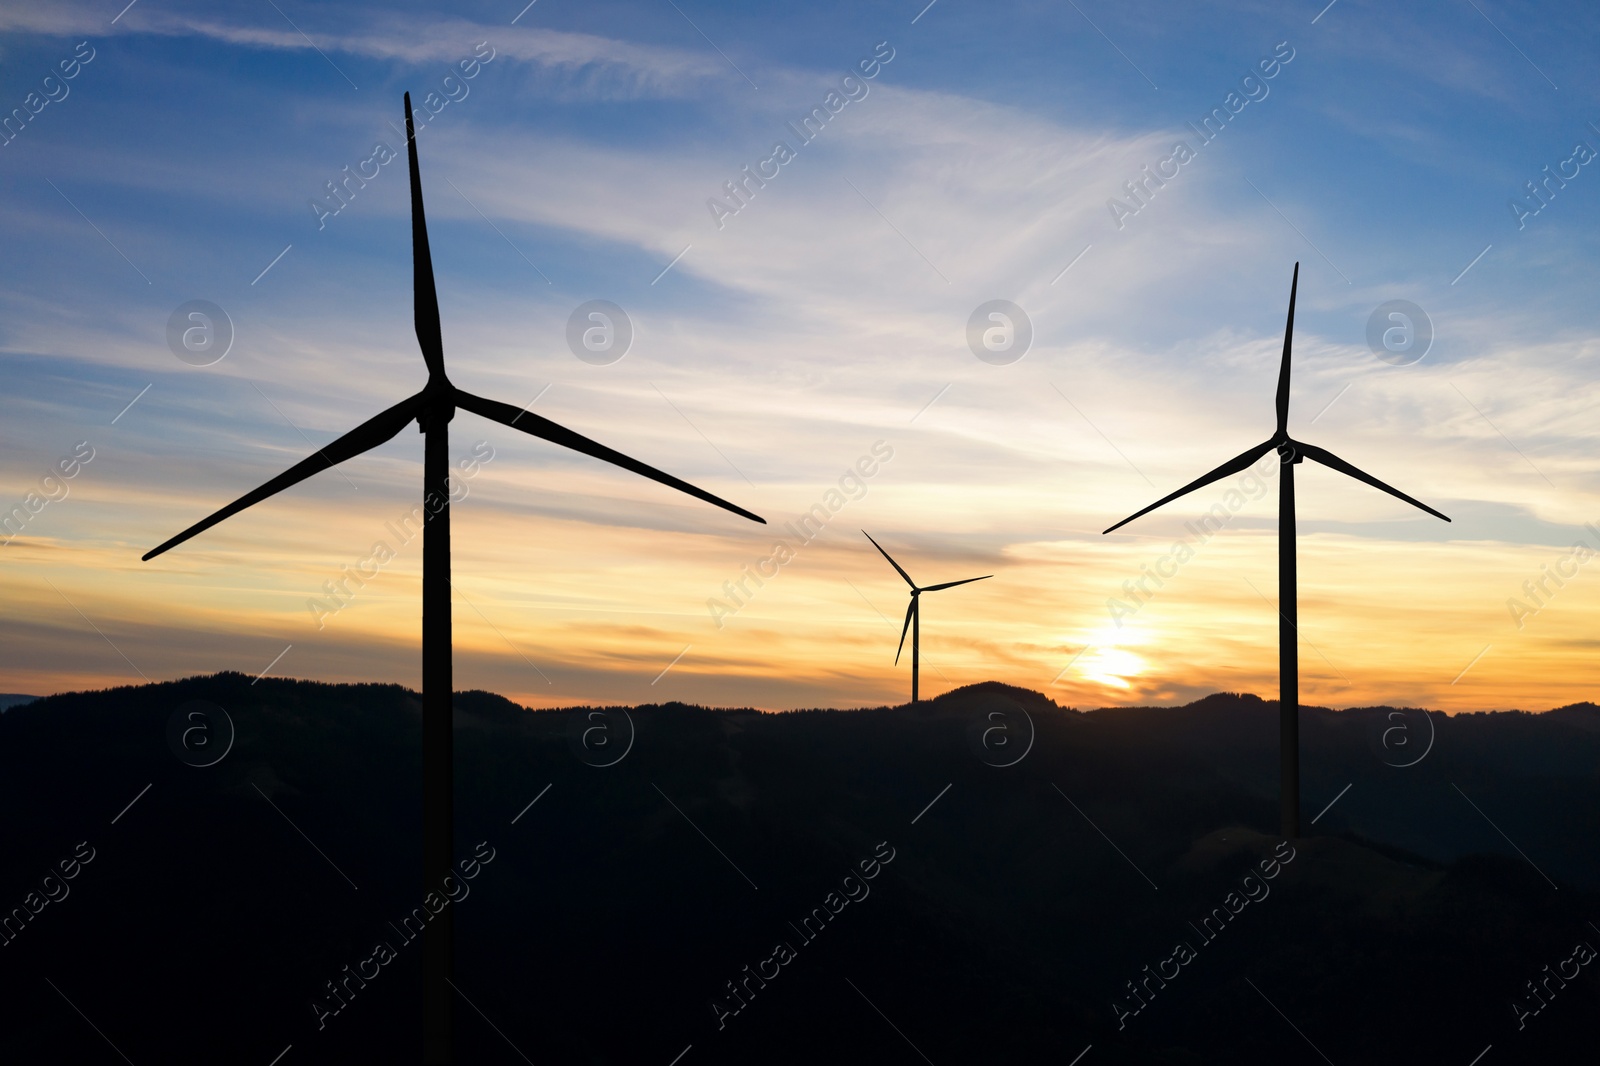 Image of Modern wind turbines in mountains at sunset. Alternative energy source